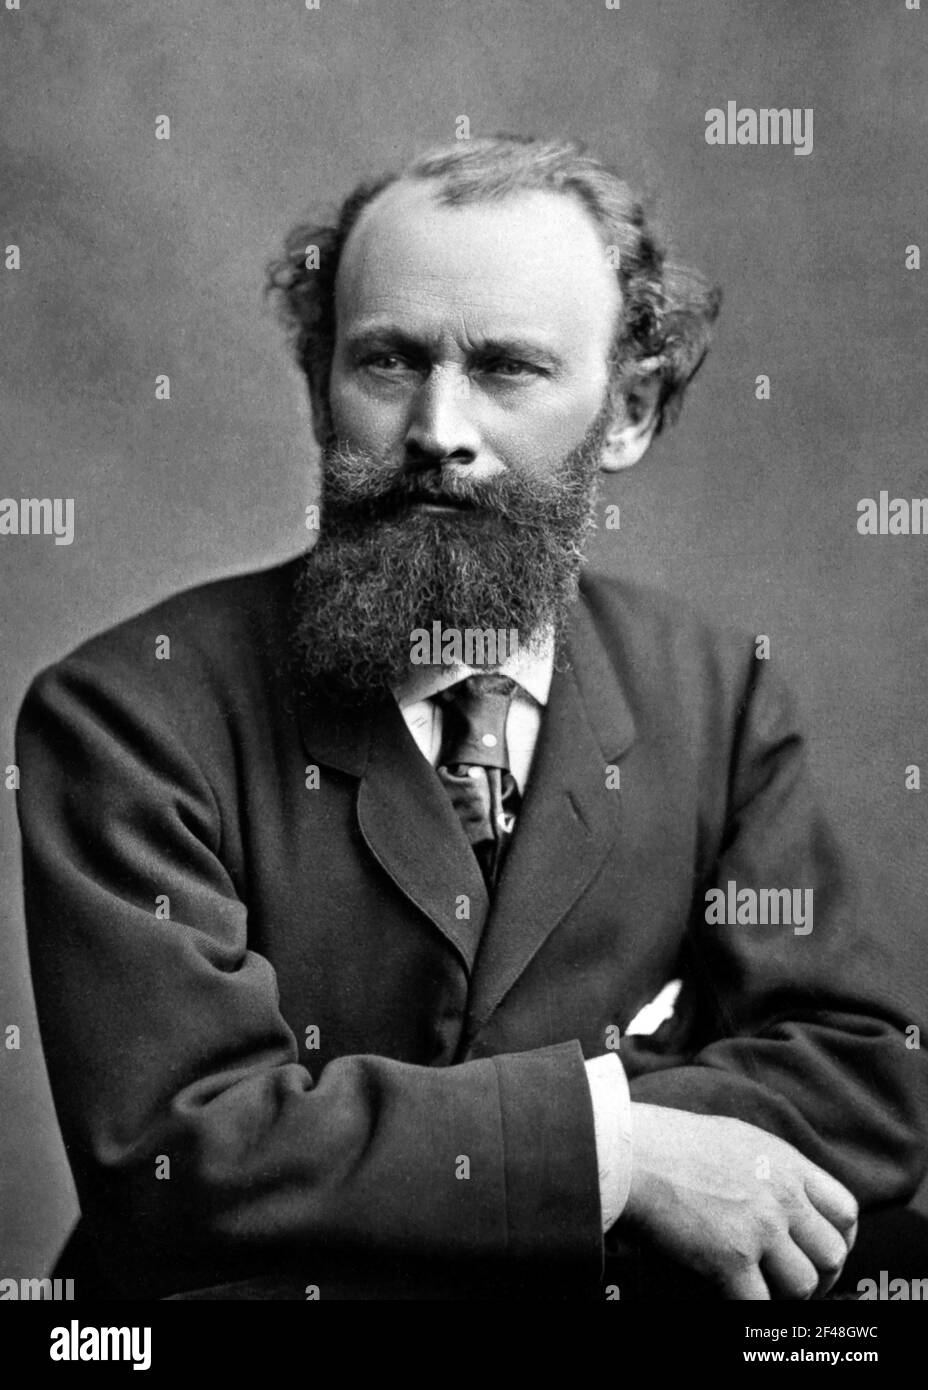 Edouard Manet. Portrait of the French artist, Édouard Manet (1832-1883) by Nadar, 1870 Stock Photo